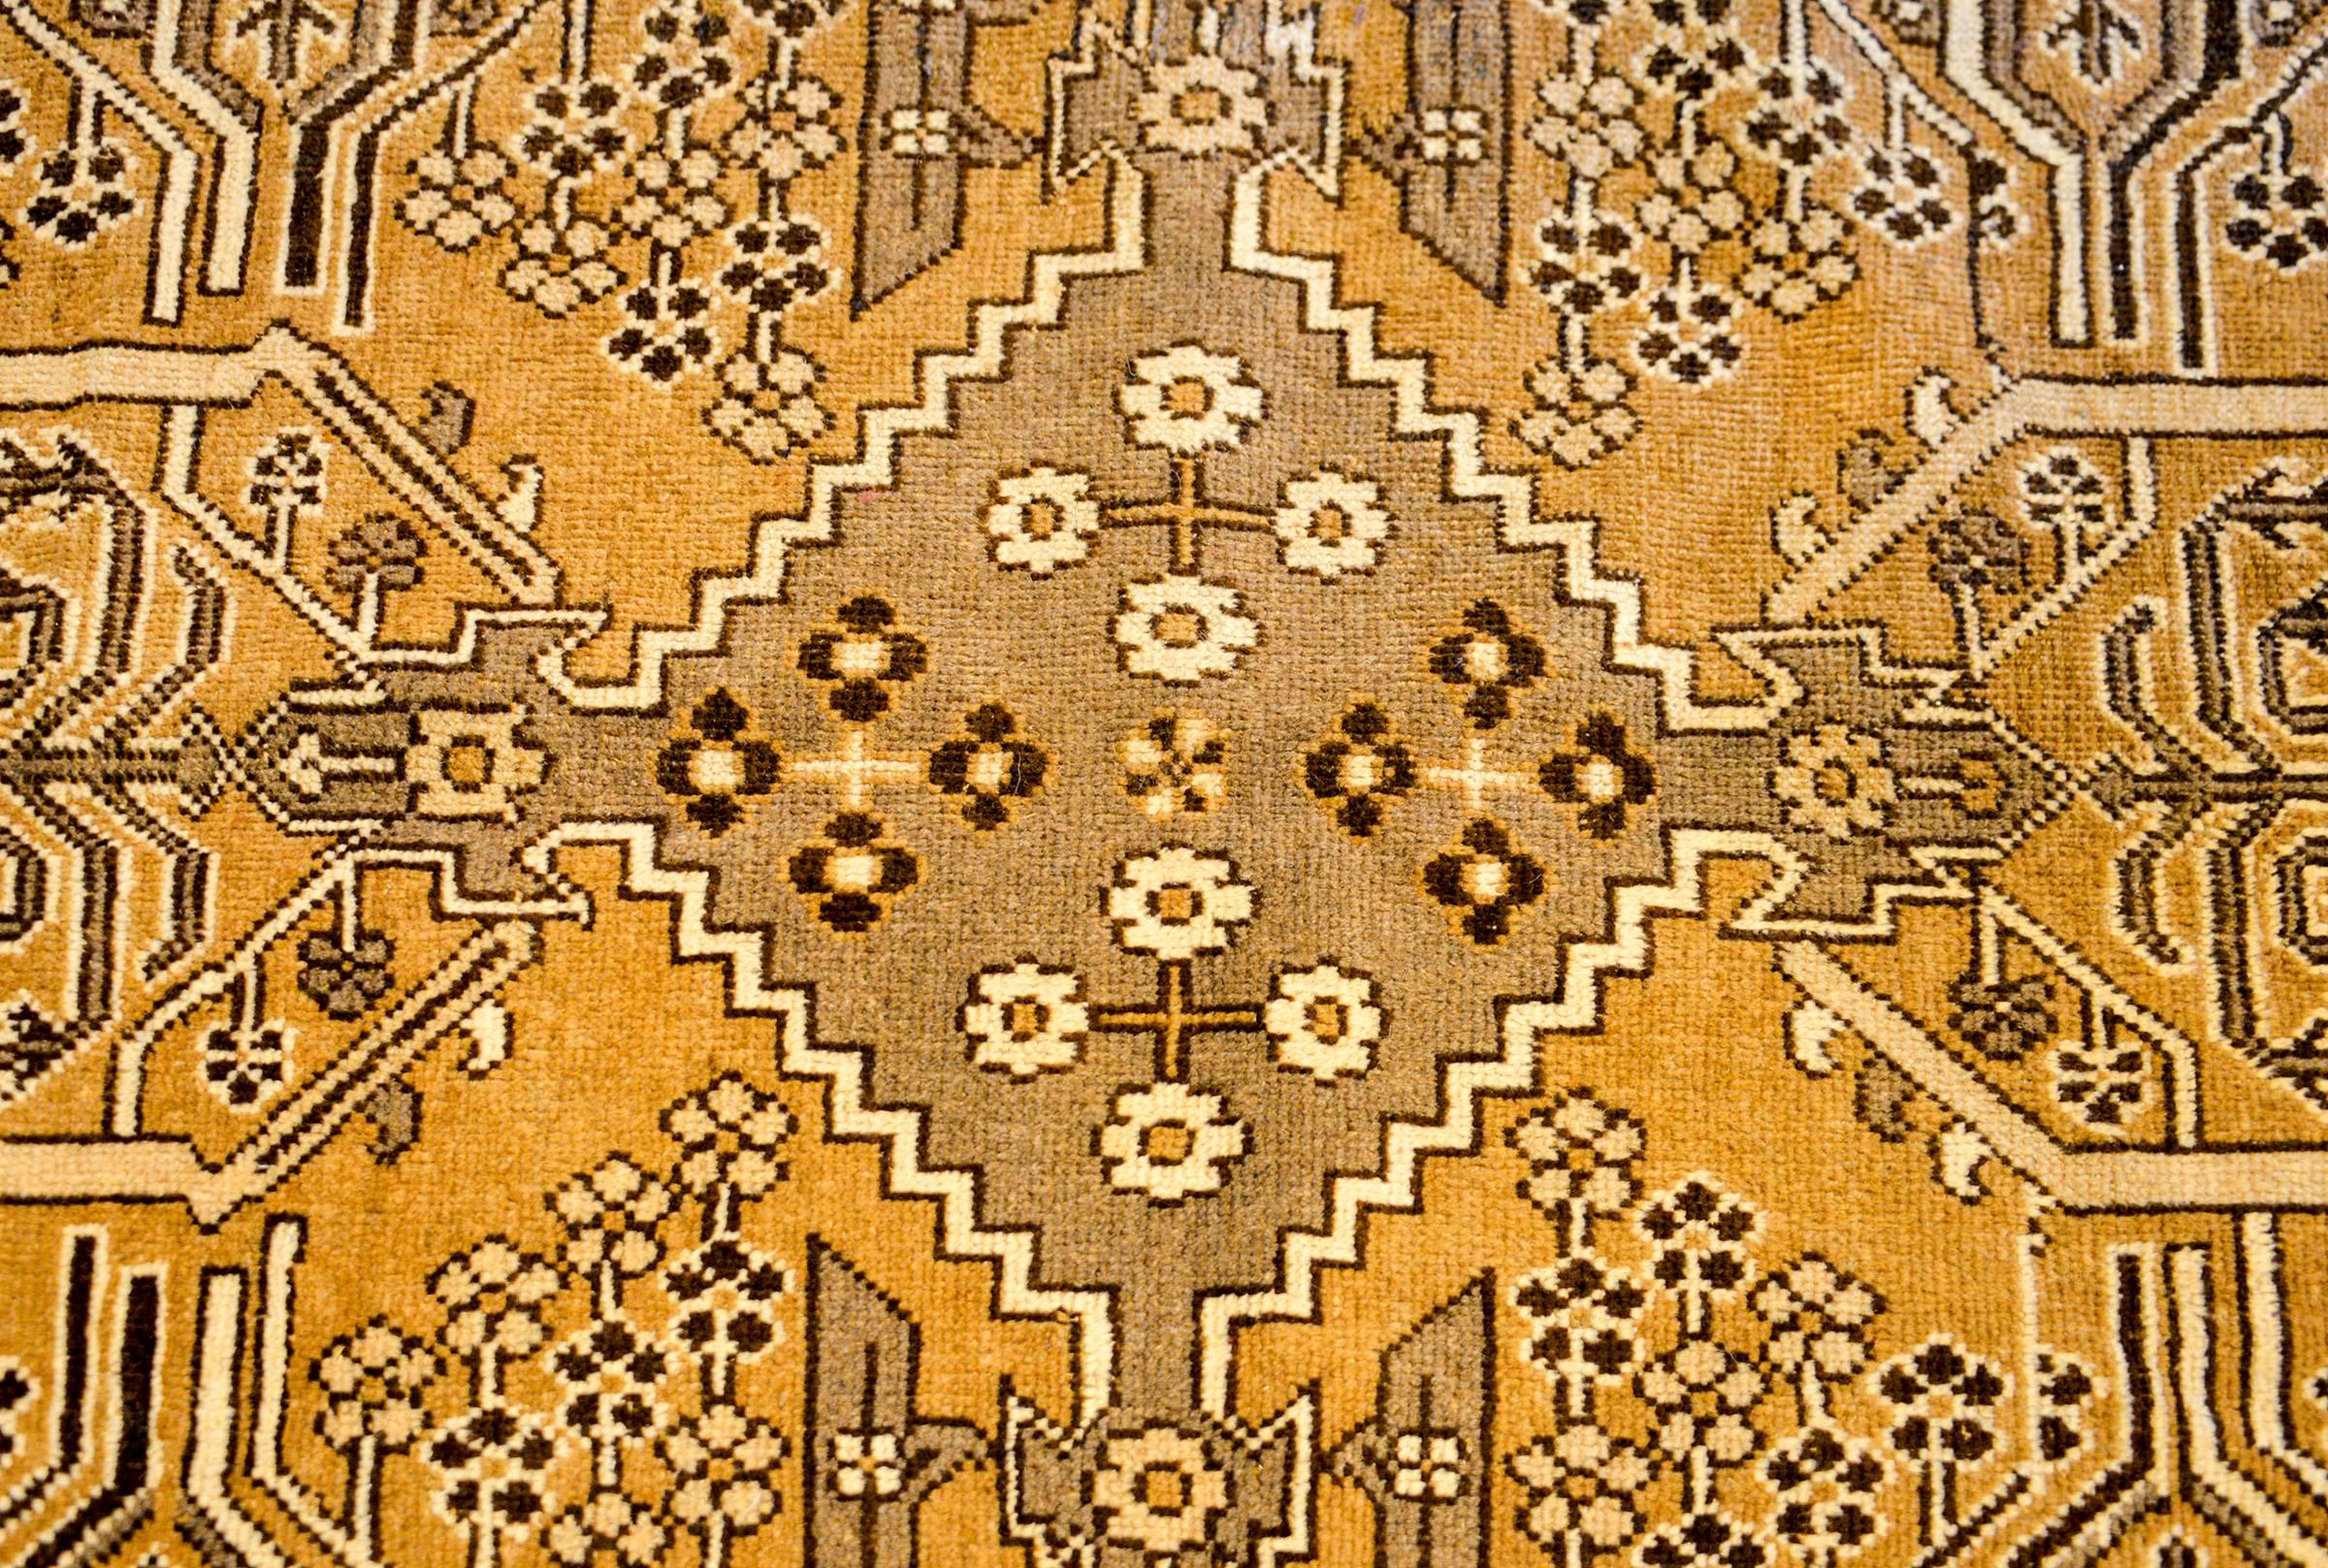 A wonderful Early-20th century Persian Bakhtiari rug with a wonderful all-natural, undyed, wool color palette. The central field is mirrored, depicting multiple geometric patterns within diamond shapes, and a couple willow trees with other flowers